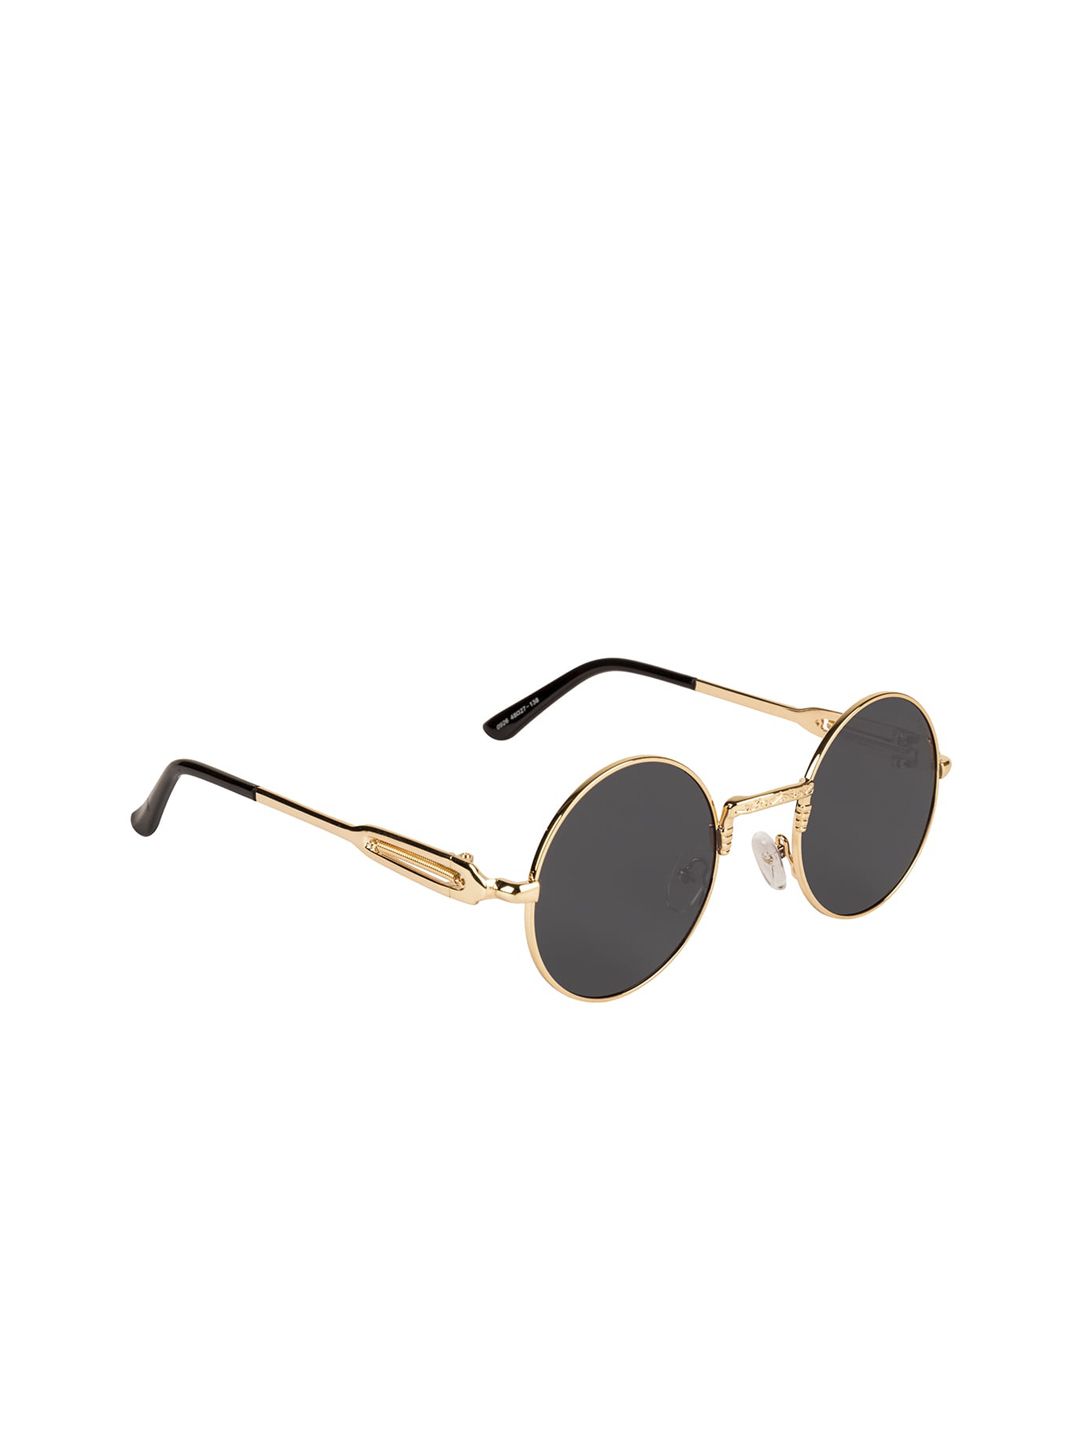 Voyage Unisex Black Lens & Gold-toned Round Sunglasses With UV Protected Lens Price in India